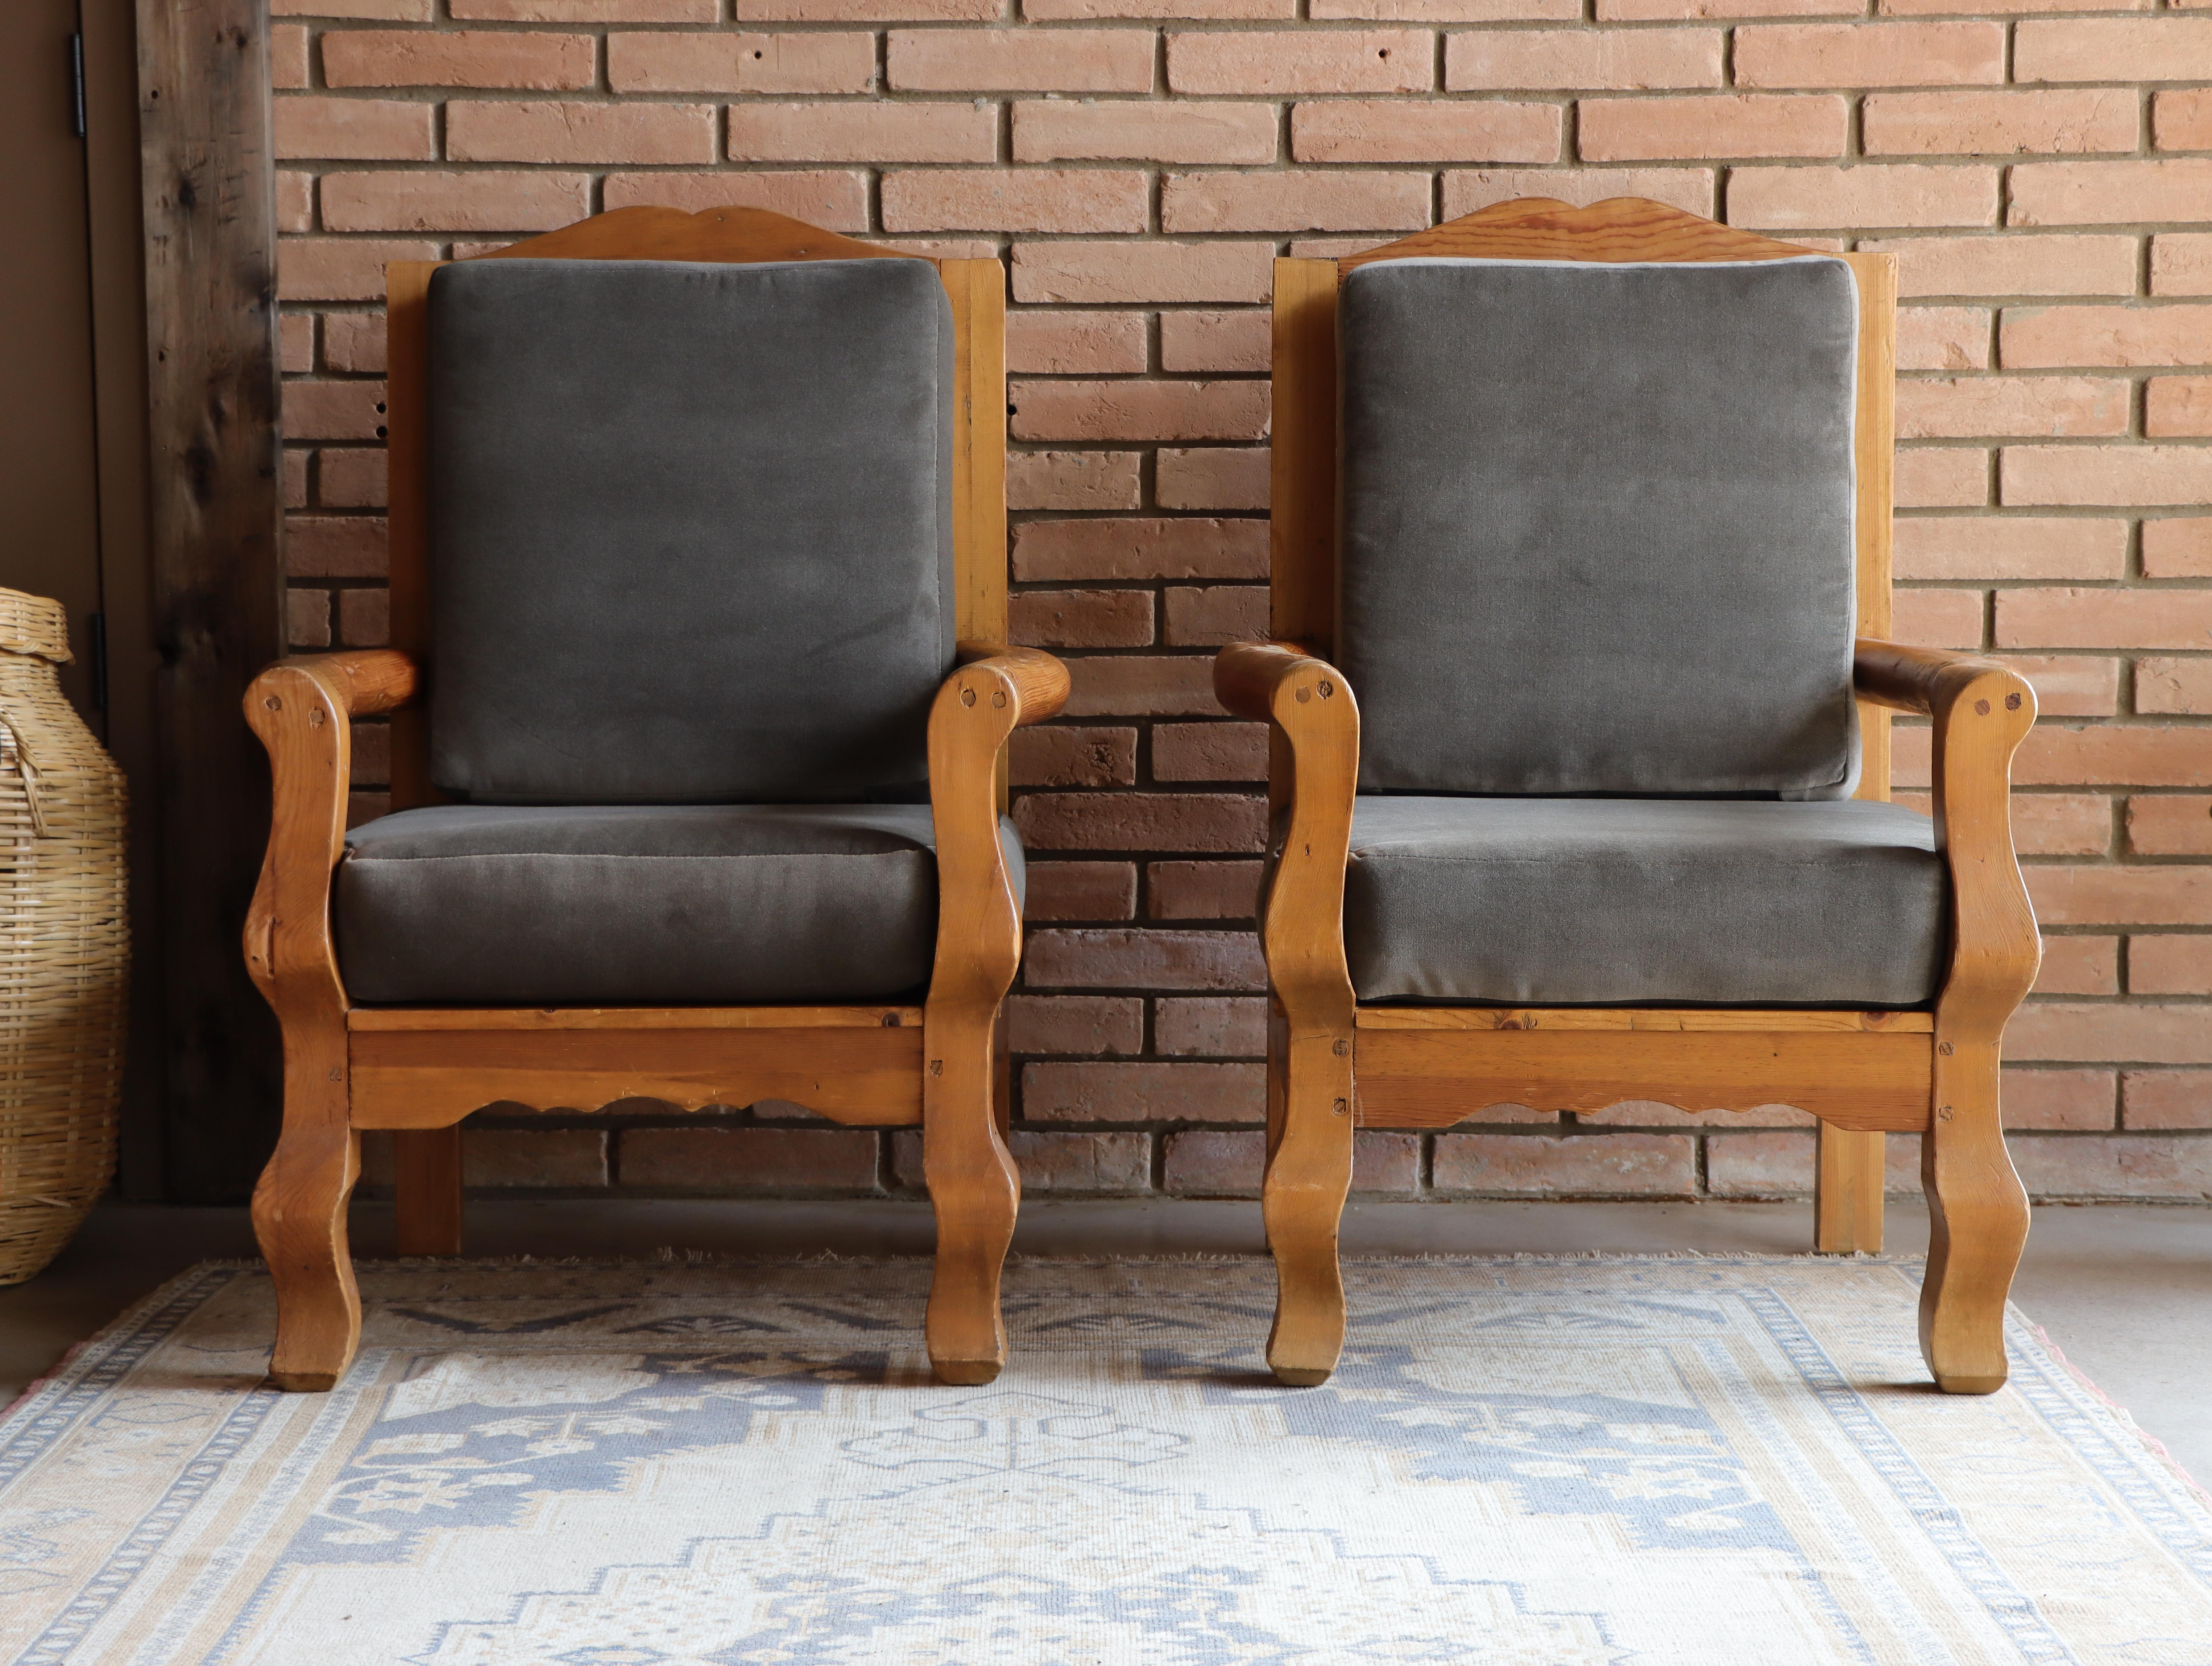 Beautiful vintage handmade Mexican arm chairs in the style of William Spratling. Executed in pine, these chairs show off wonderful movement and presence. Each cushion is upholstered in a soft gray velvet adding to their sophistication

Would be a